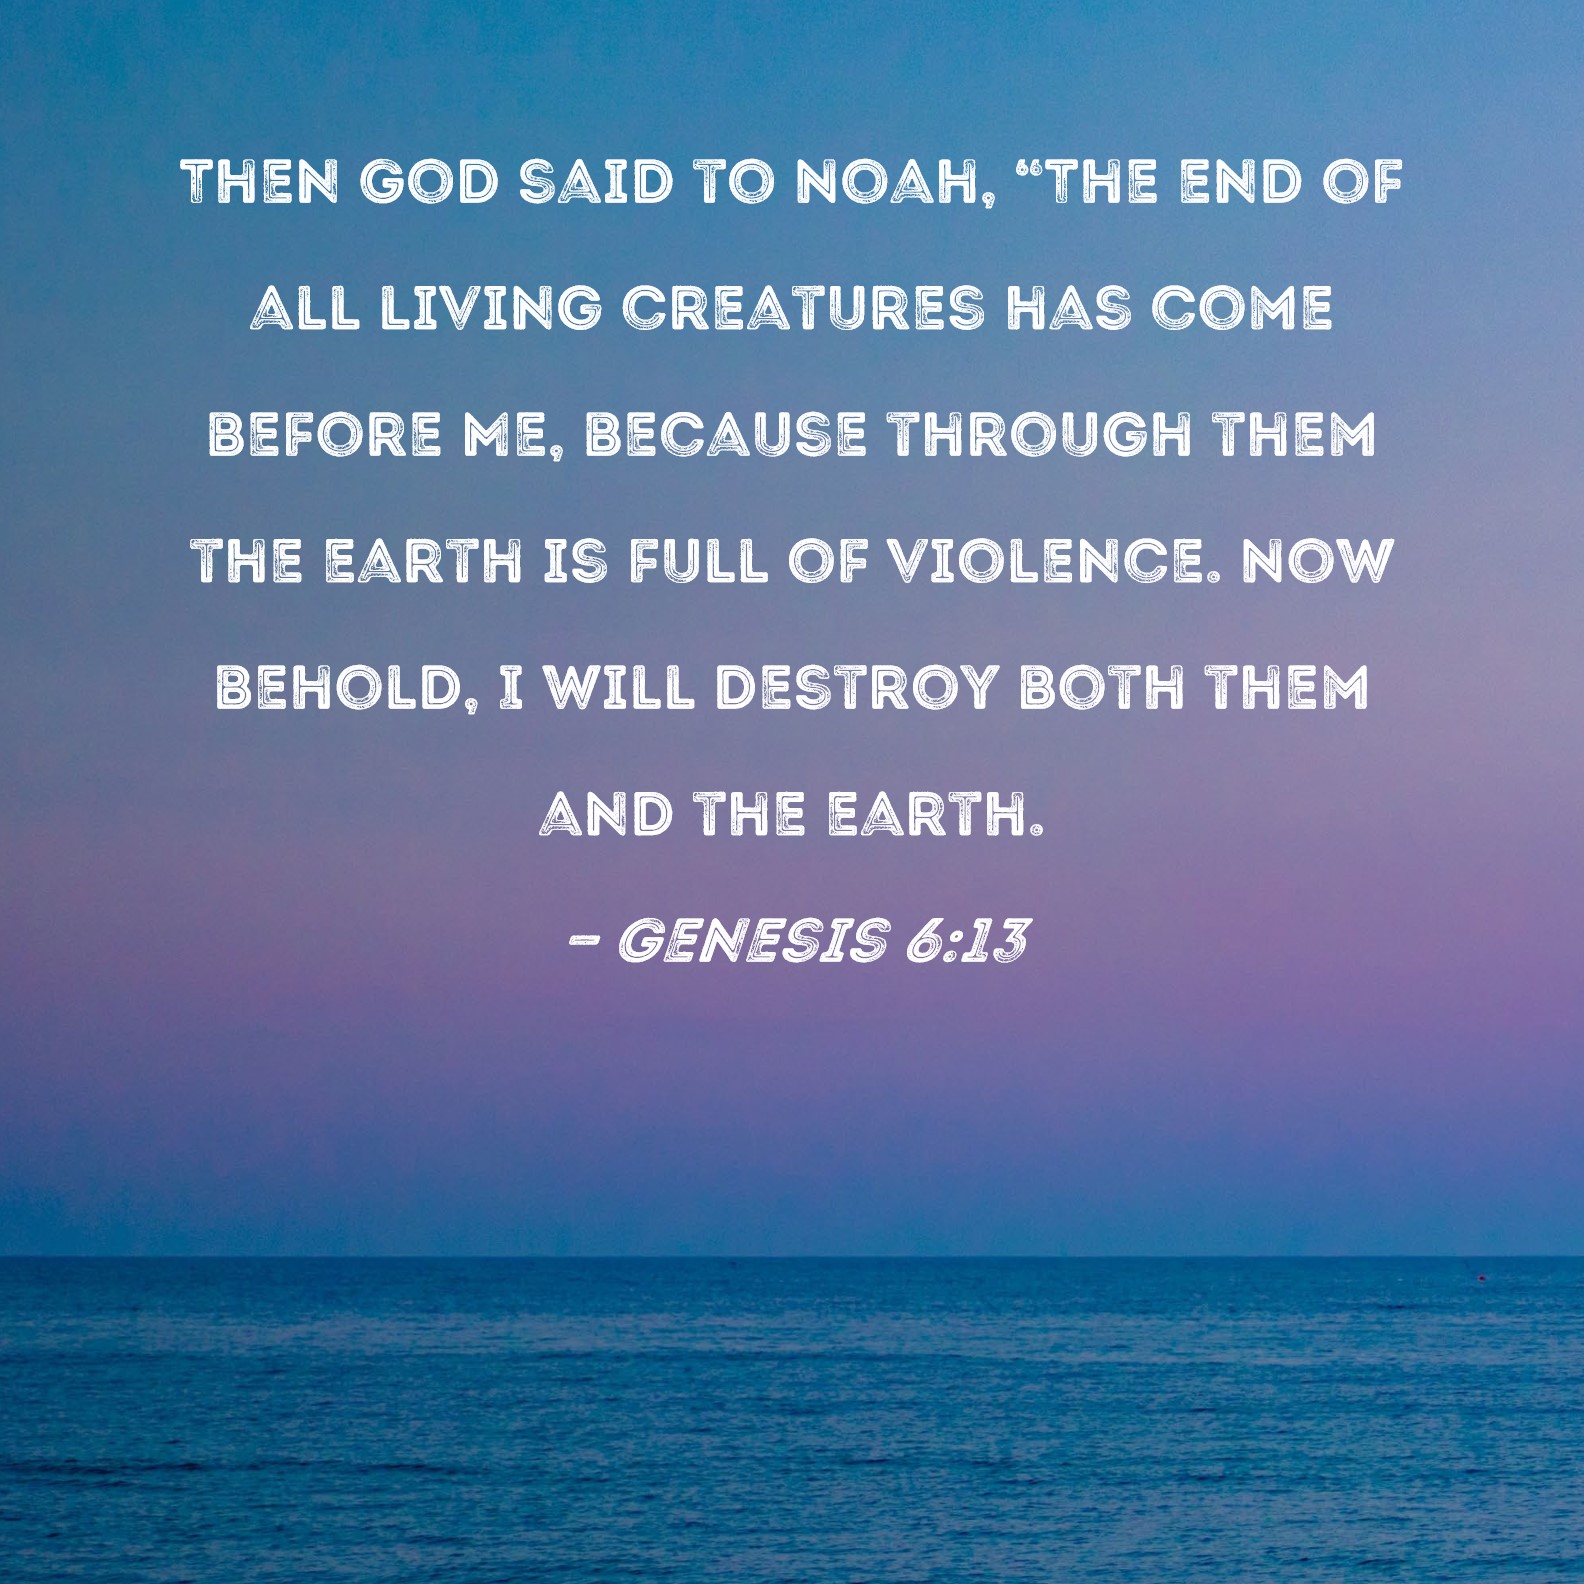 Genesis 6:13 Then God said to Noah, "The end of all living creatures has  come before Me, because through them the earth is full of violence. Now  behold, I will destroy both